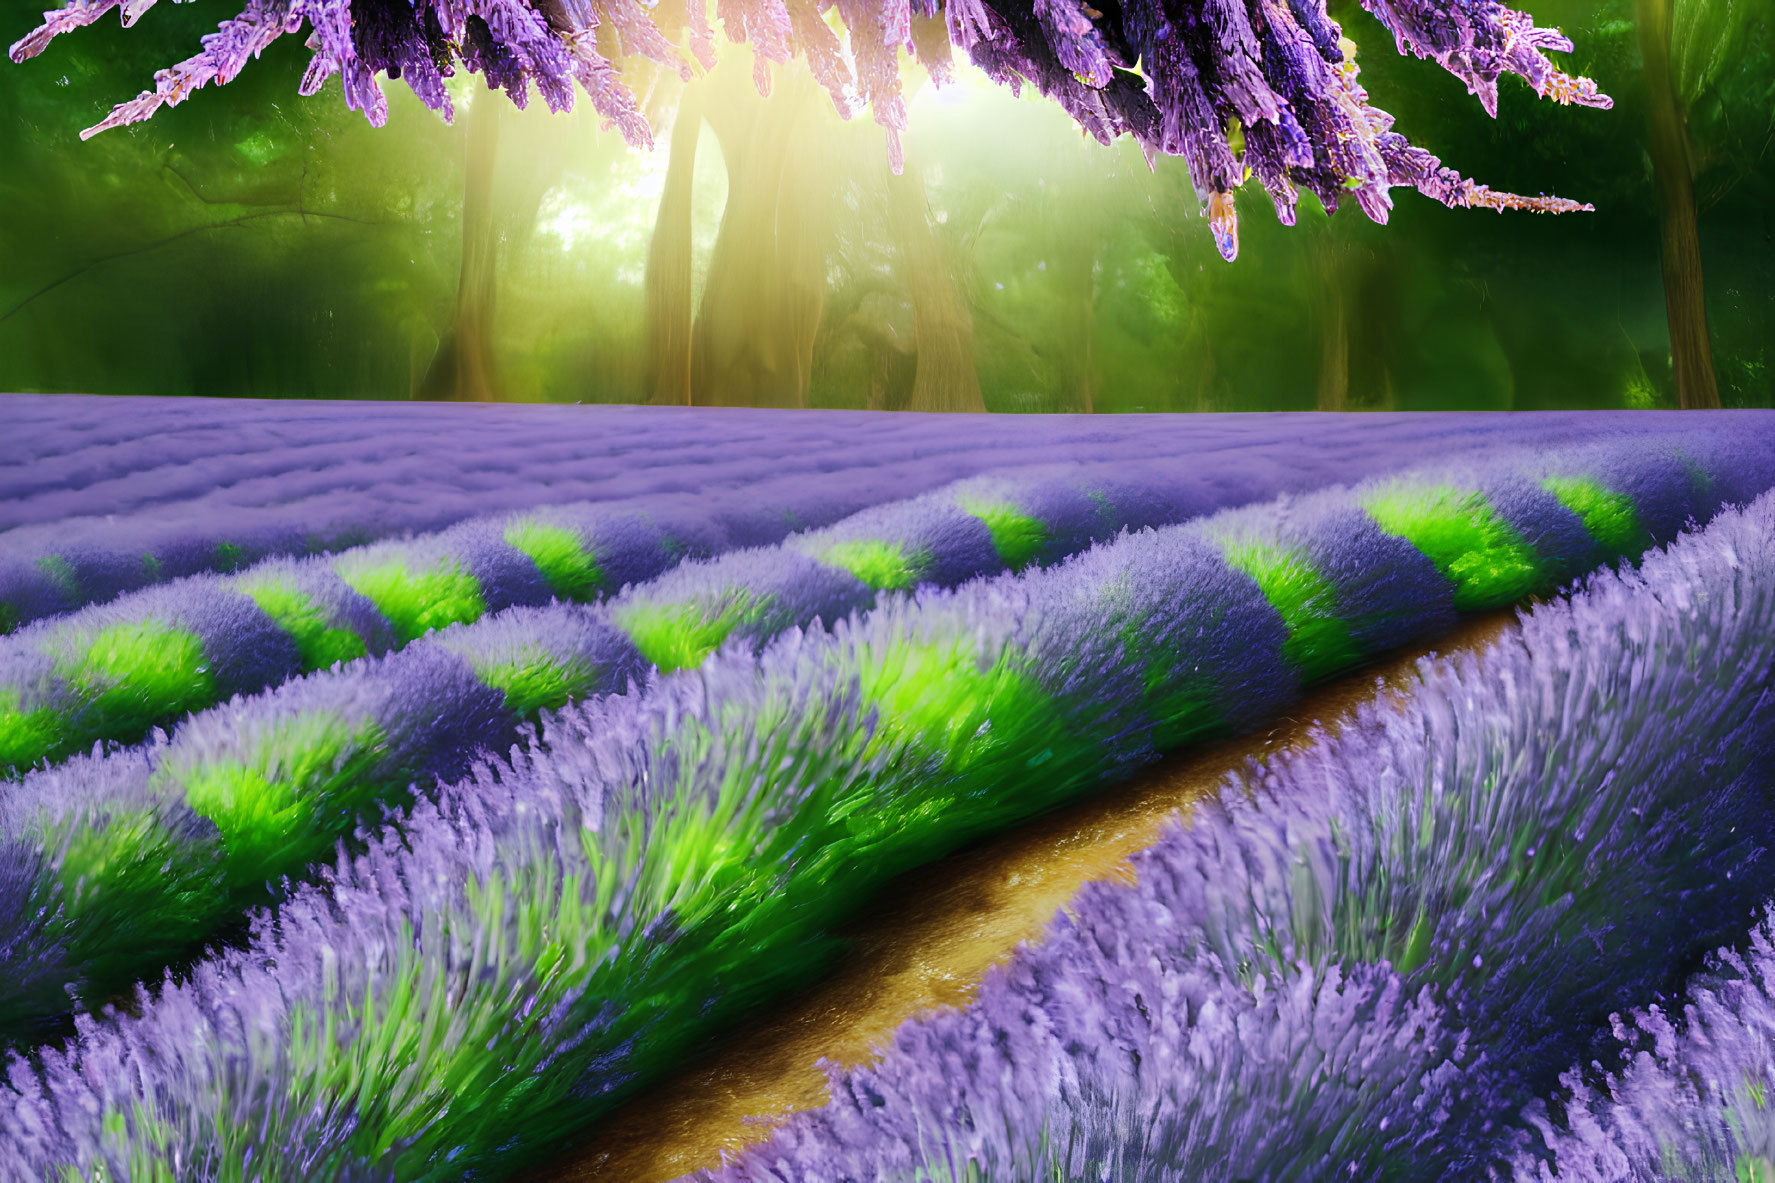 Vibrant lavender field with purple blossoms and green pathway under sunlight